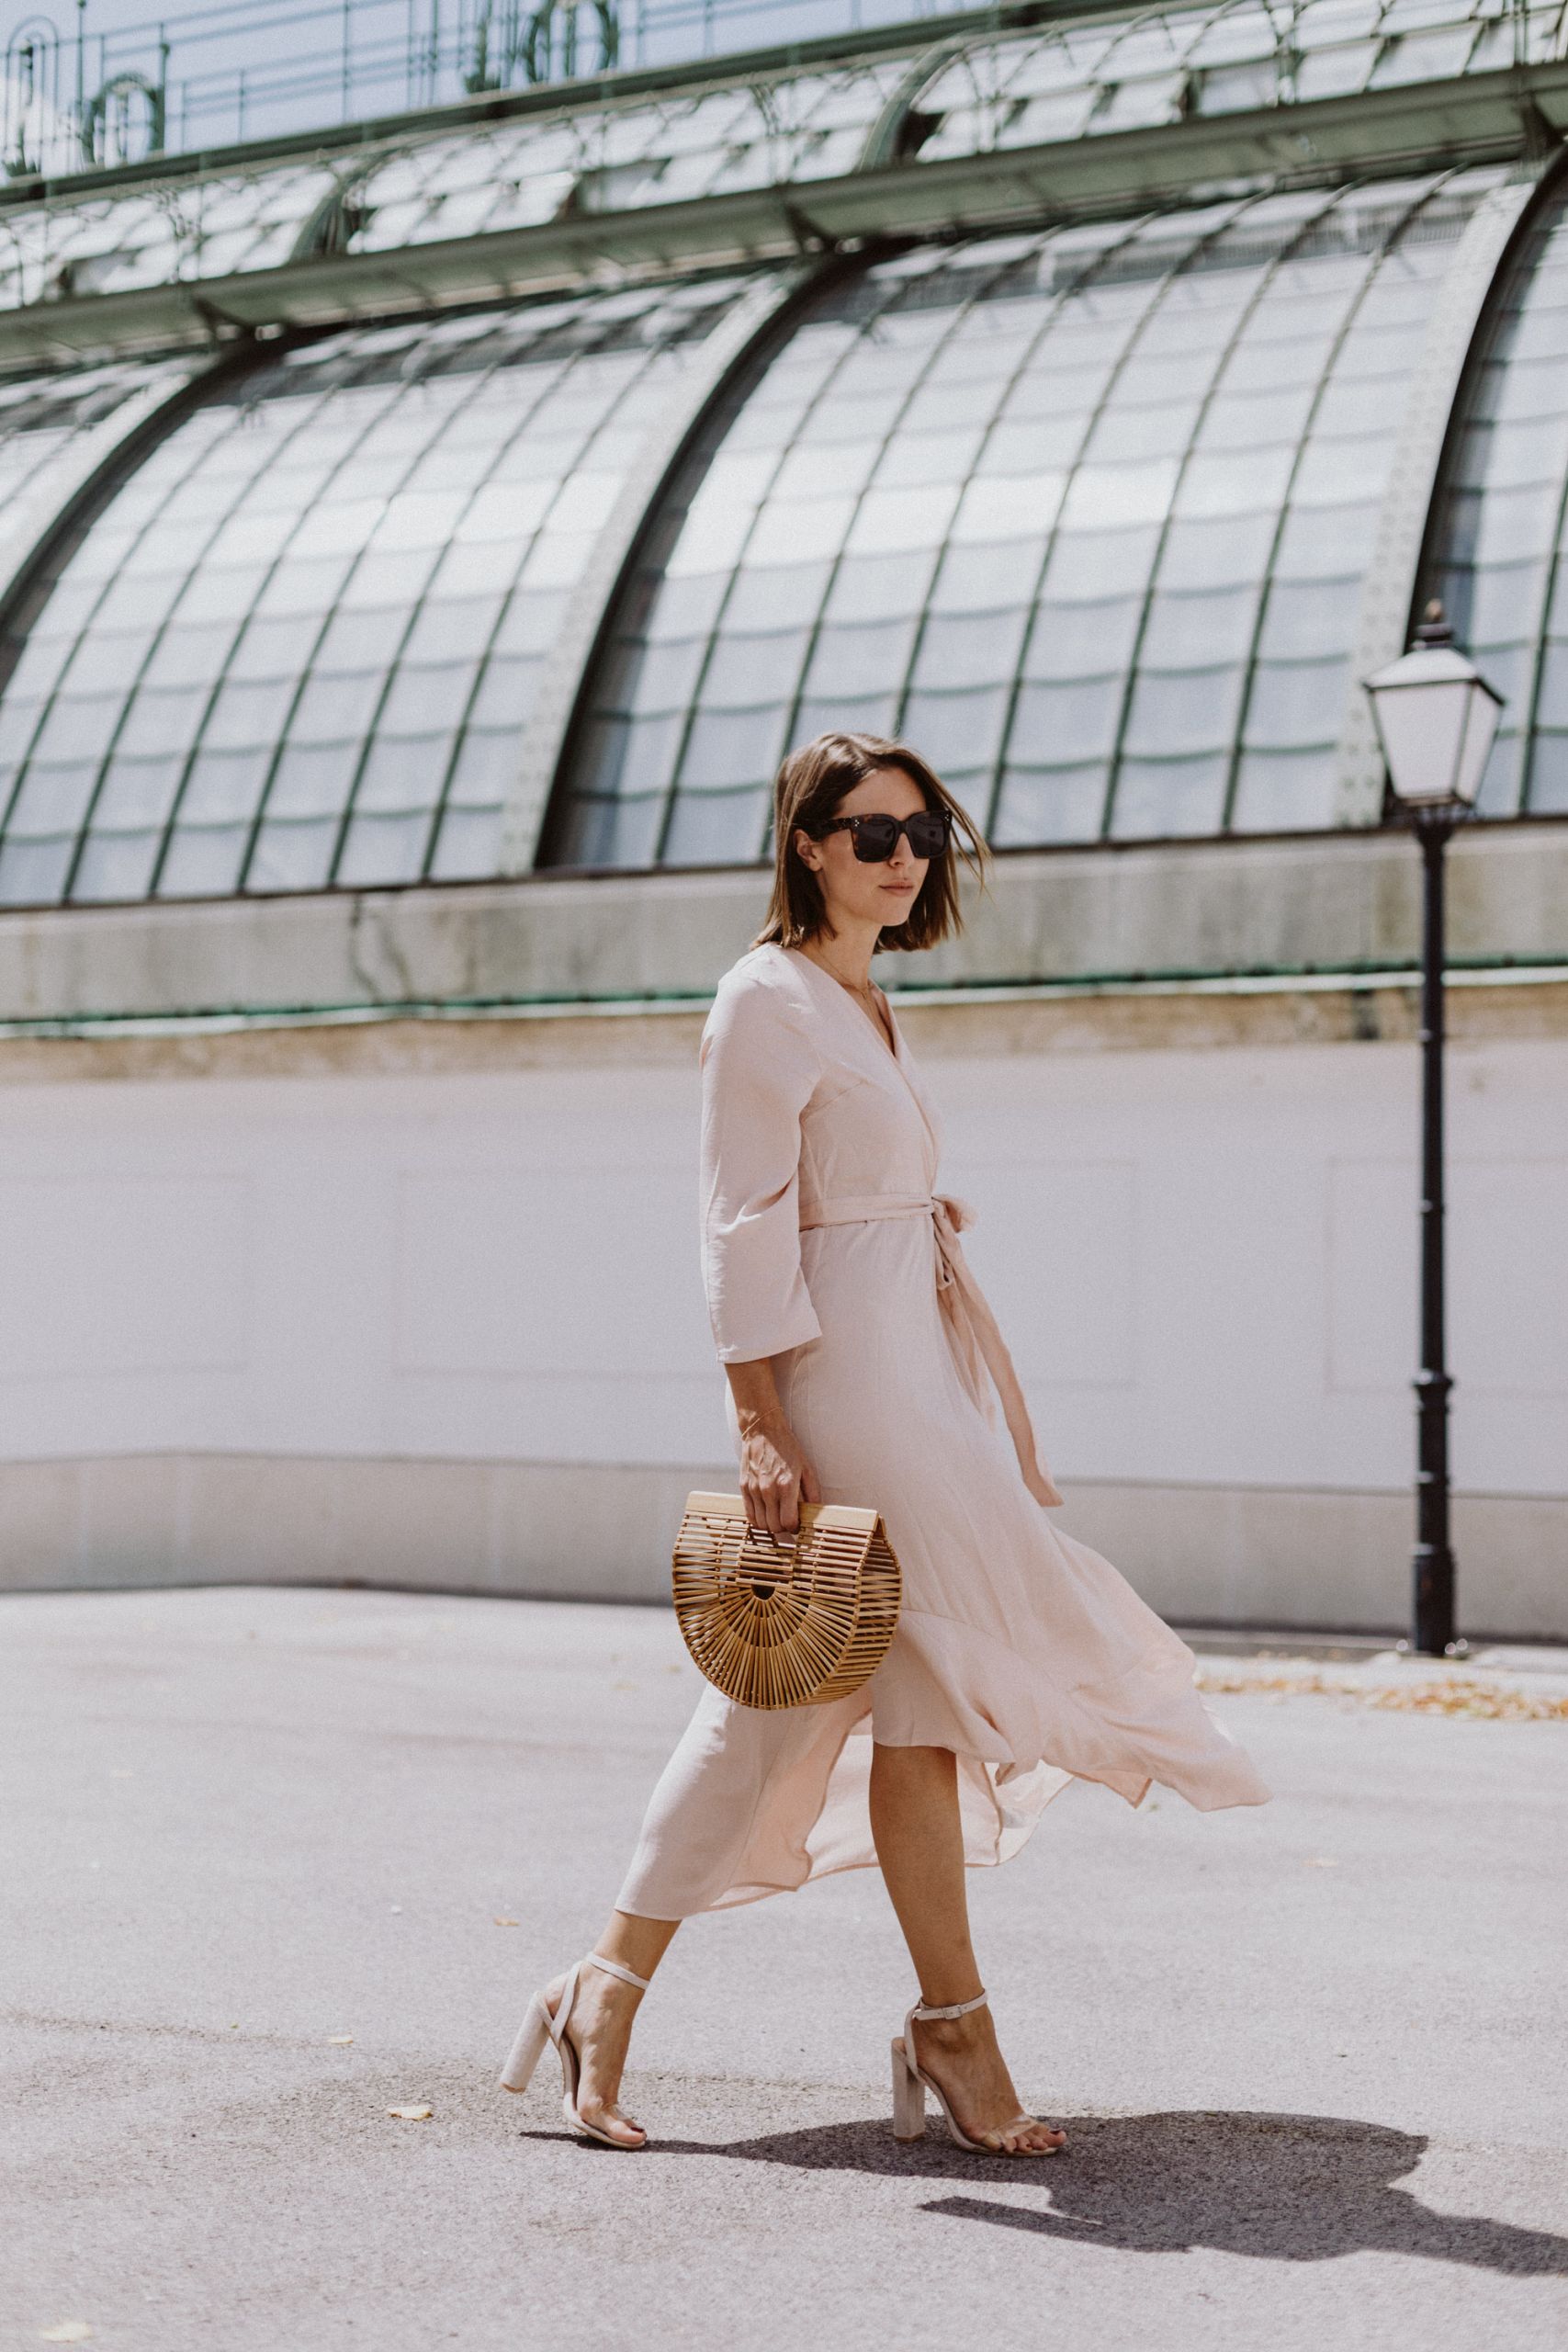 Wedding Guest Attire | The Daily Dose